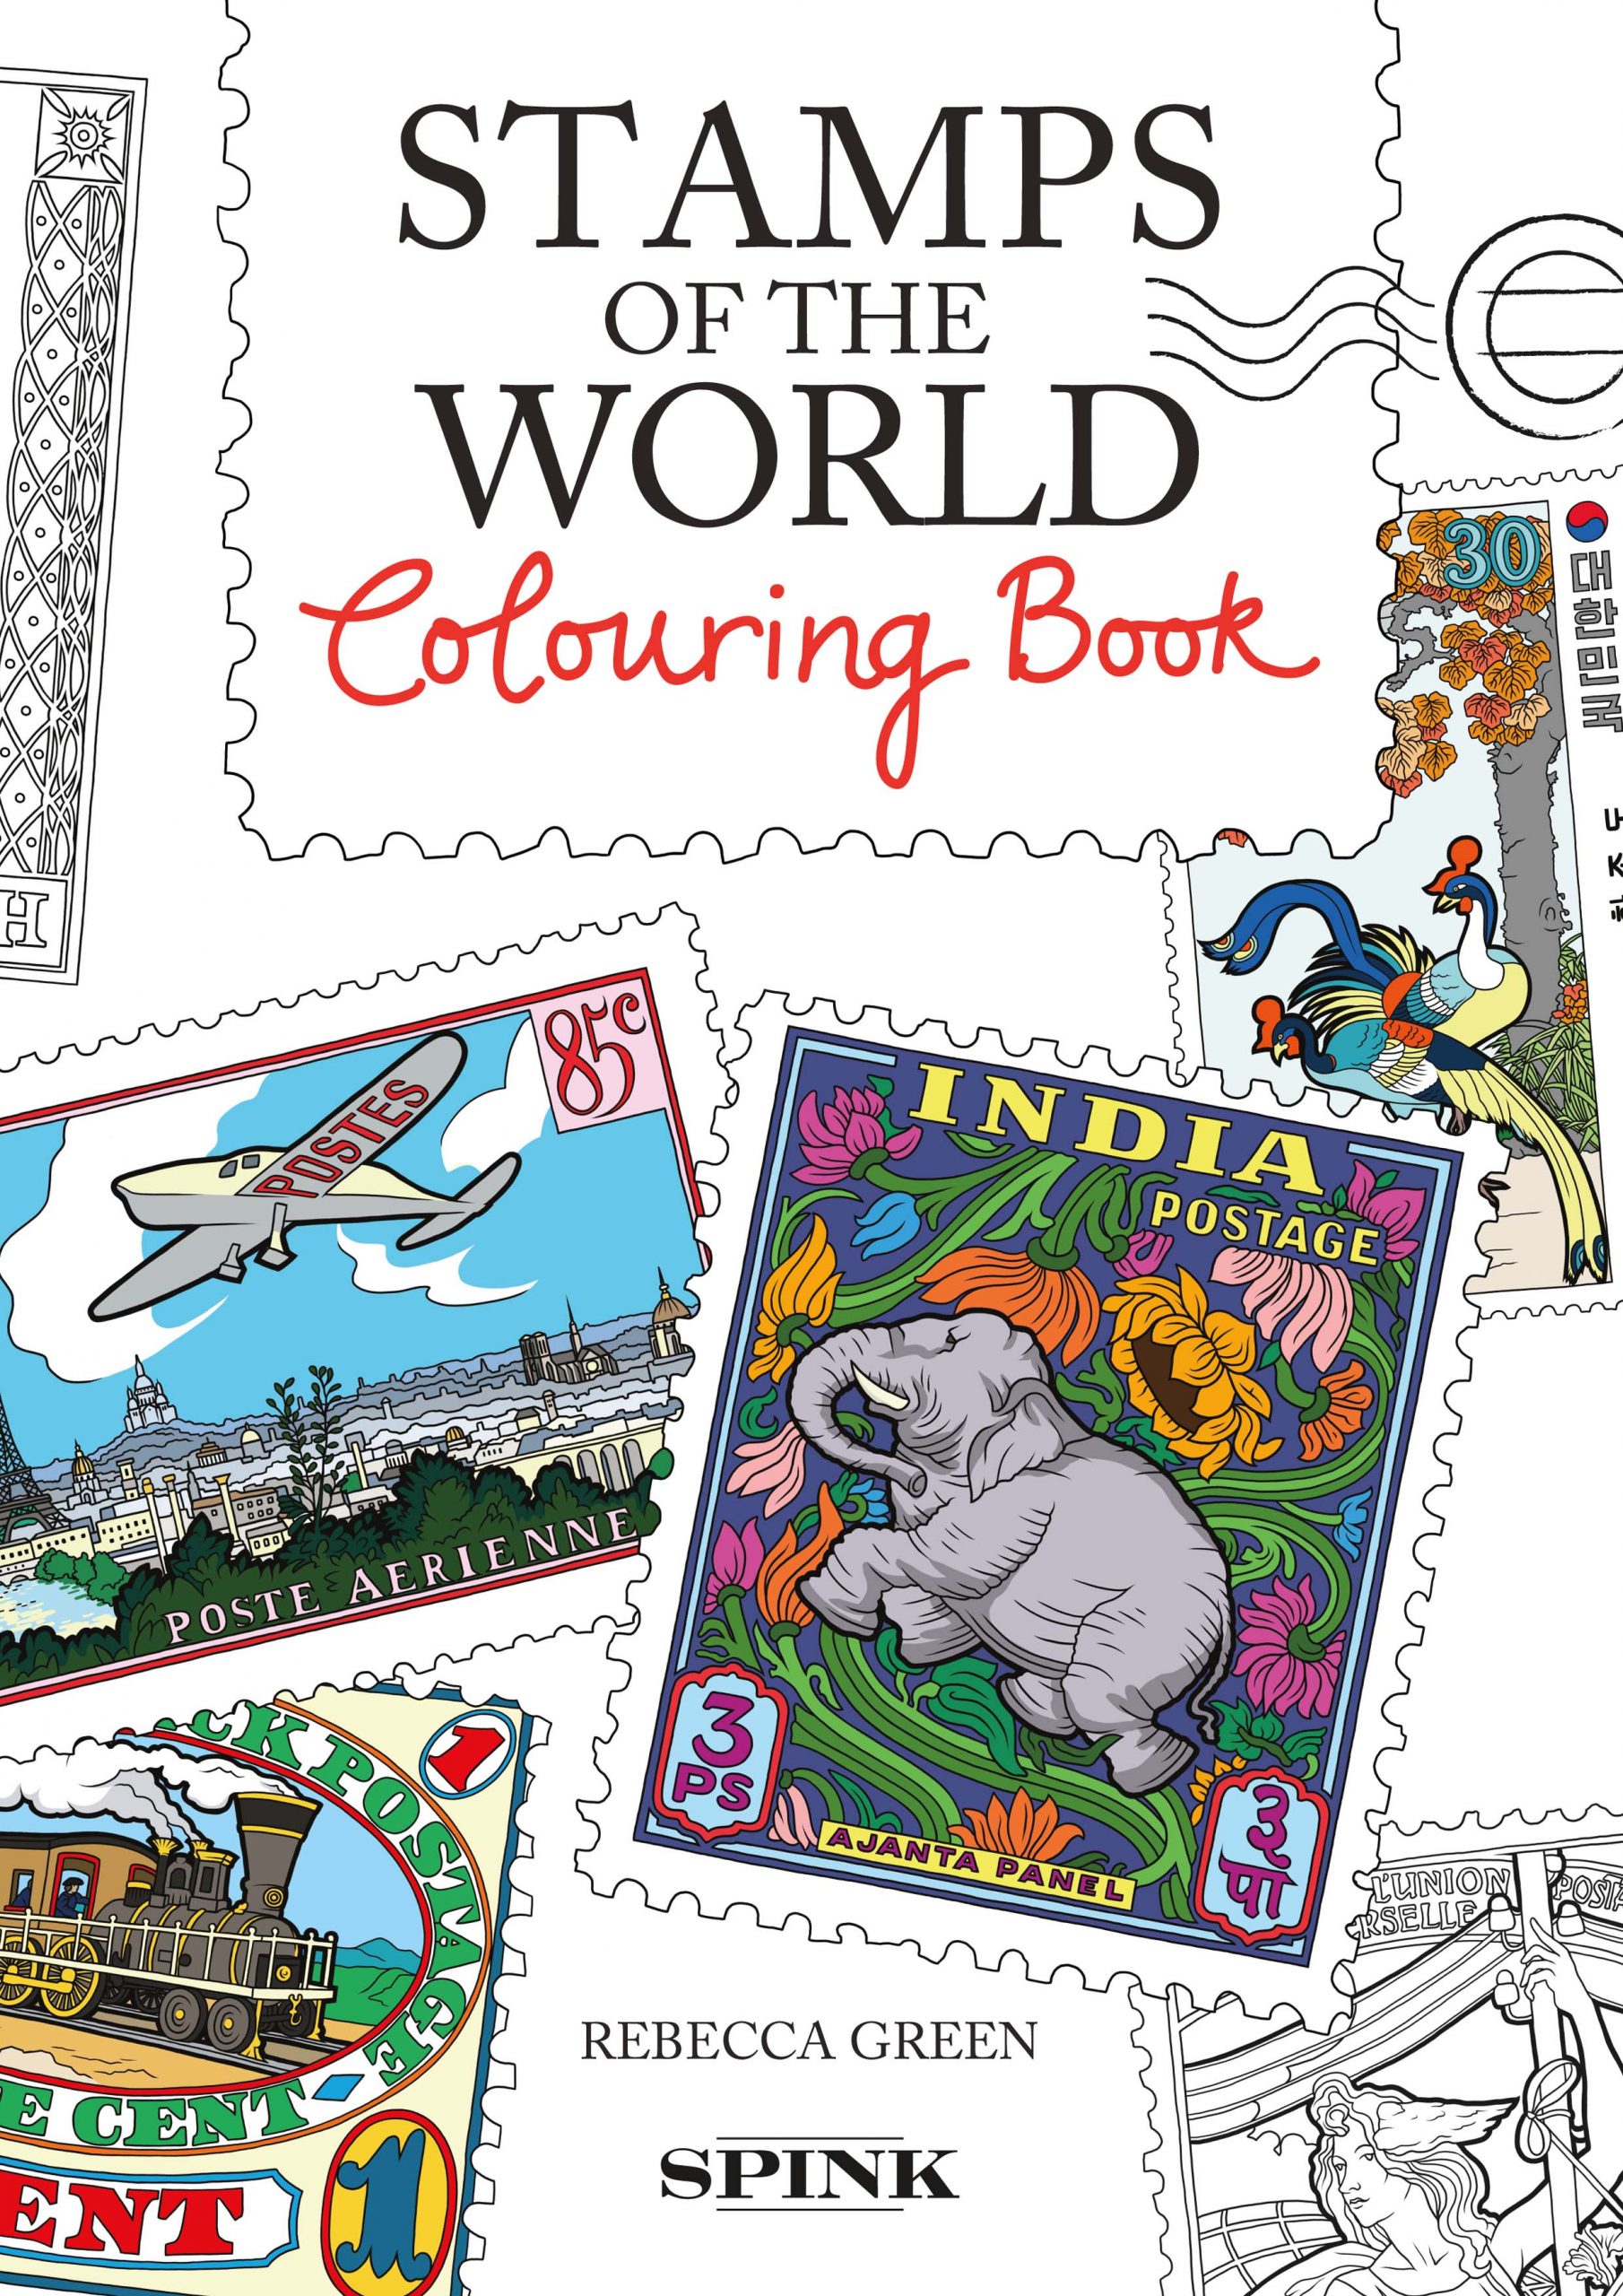 Stamps of the World Colouring Book